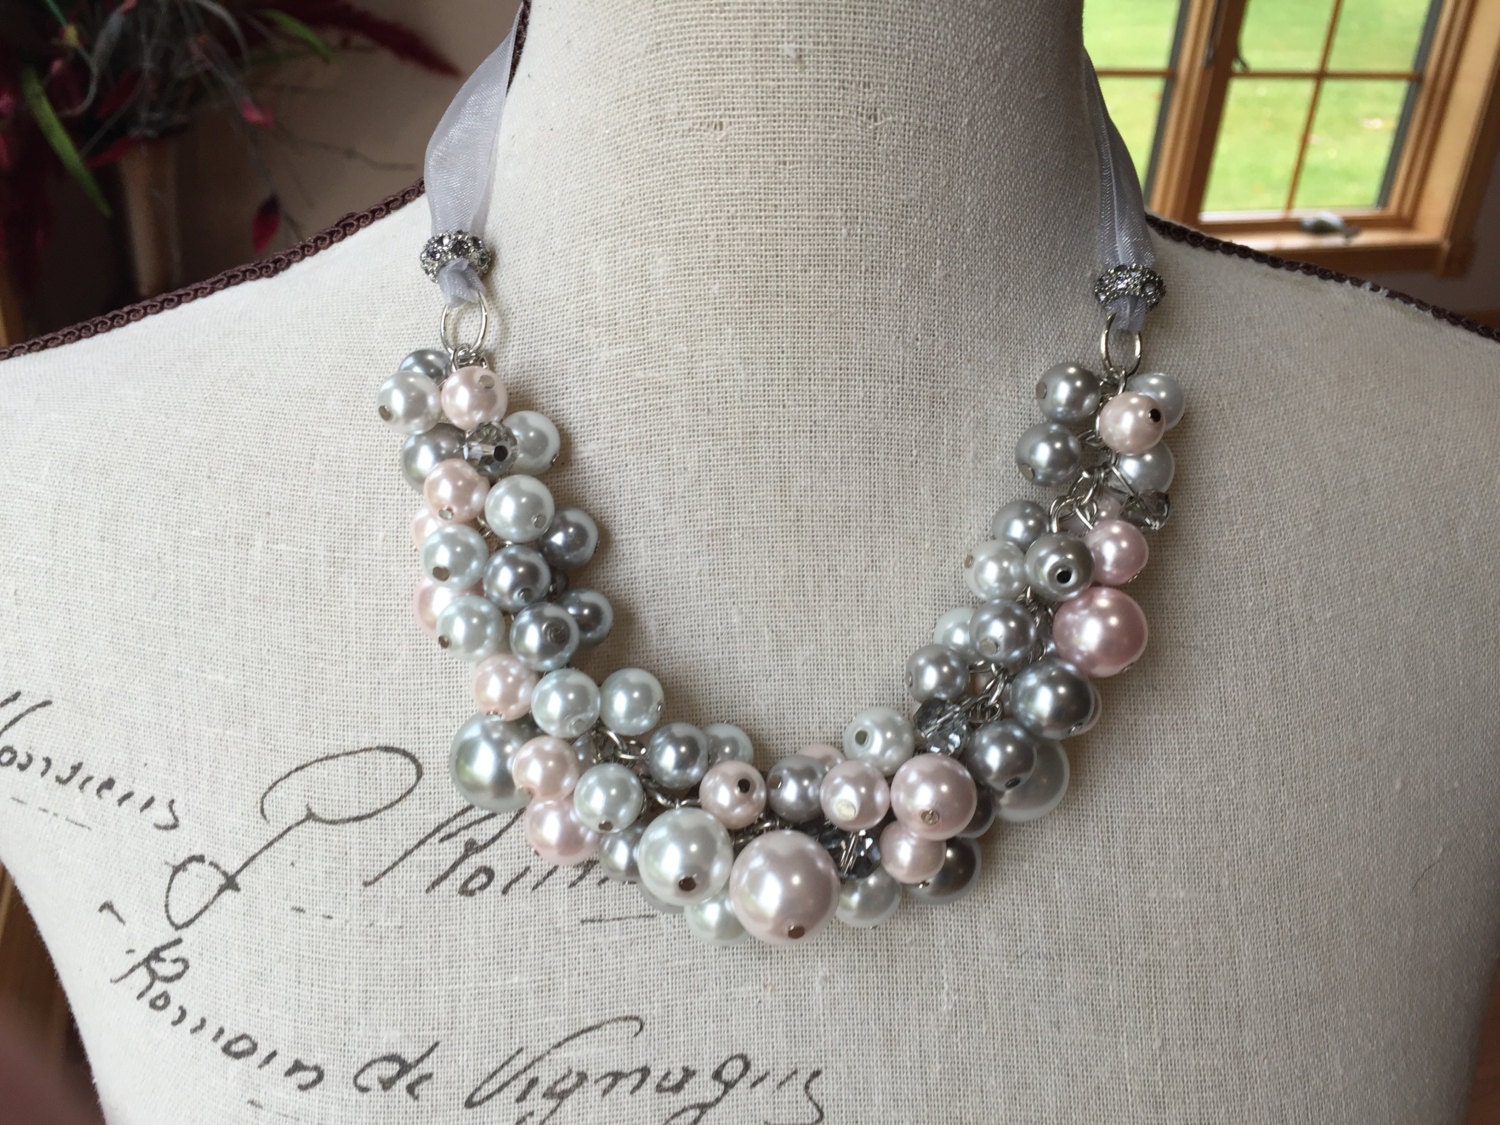 Chunky bridal necklace in pearls of white pink and grey (gray)- bridal jewelry-wedding jewelry